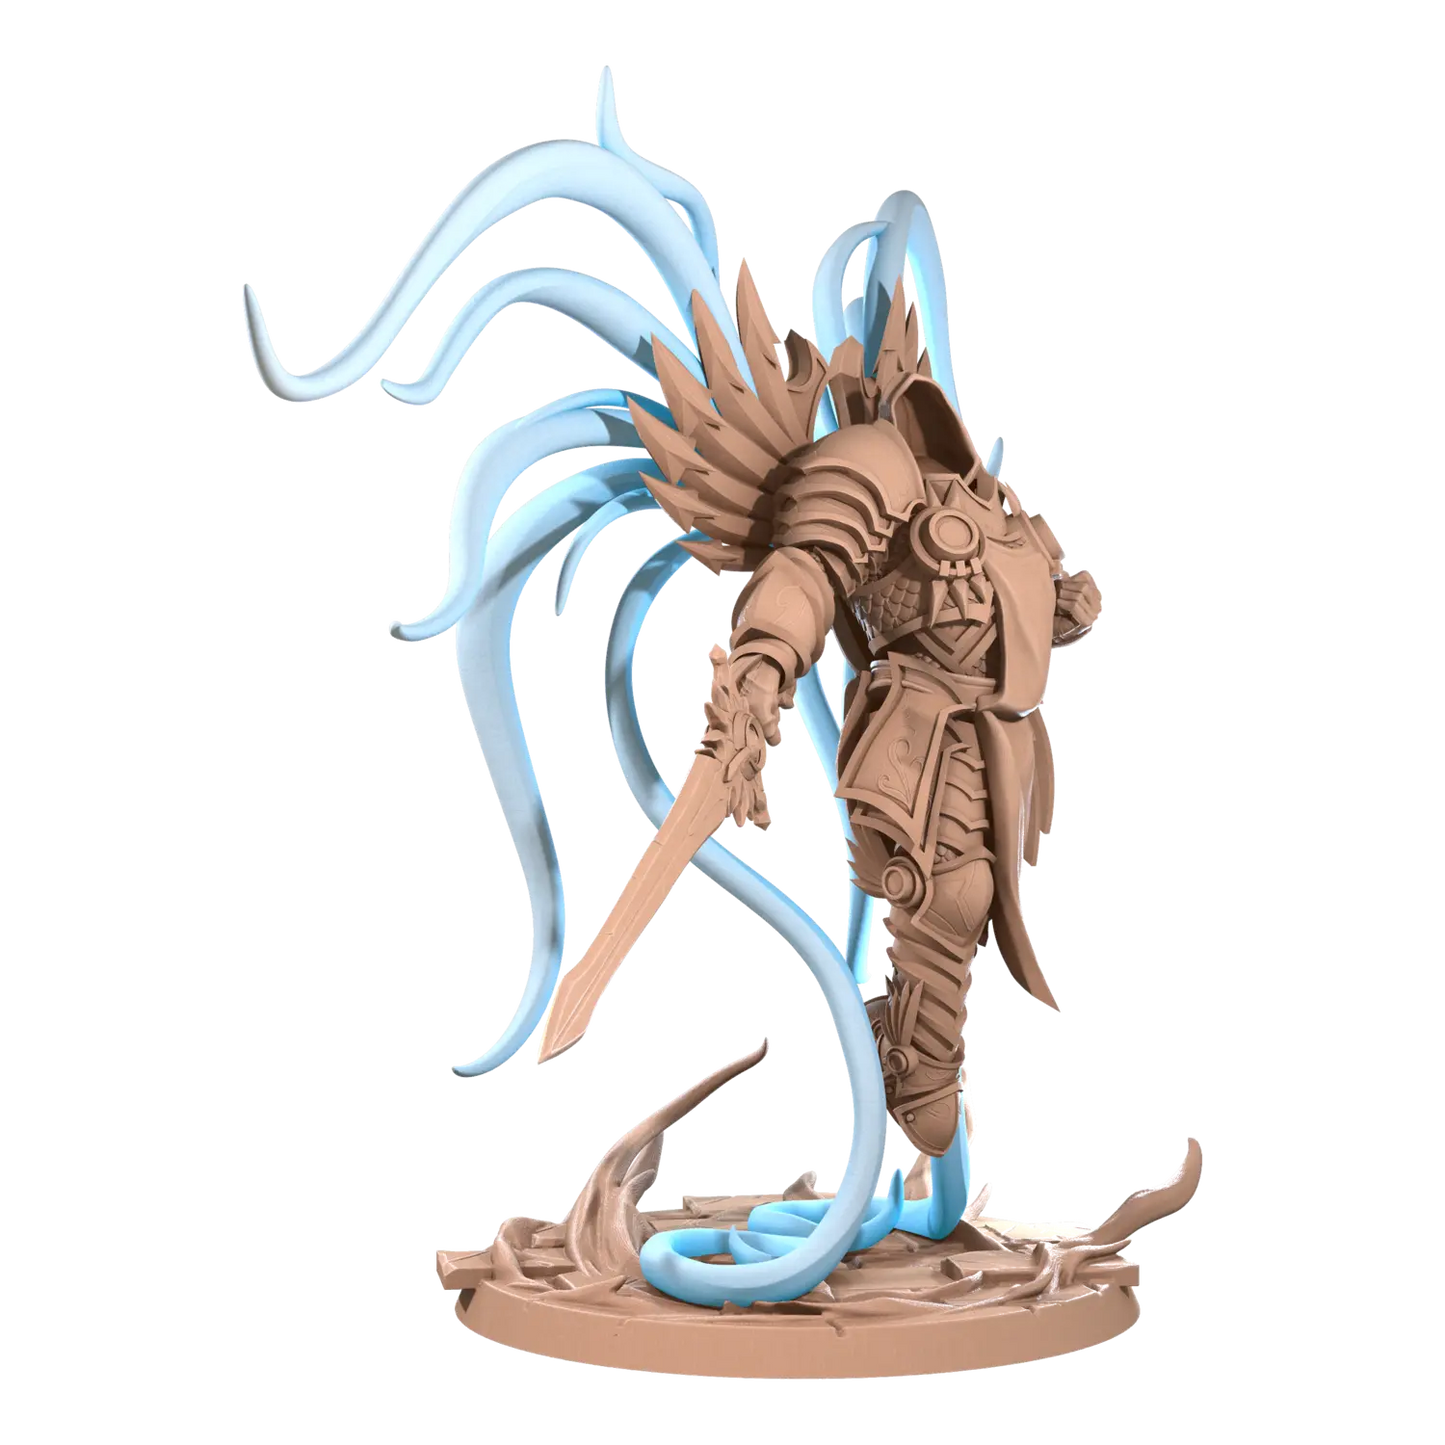 DnD Angel - Fighter - Miniature - Paladin - Serapfims Raphael, Seraphim of Justice  Angel - Fighter - Miniature - Paladin - Serapfims sold by DoubleHitShop